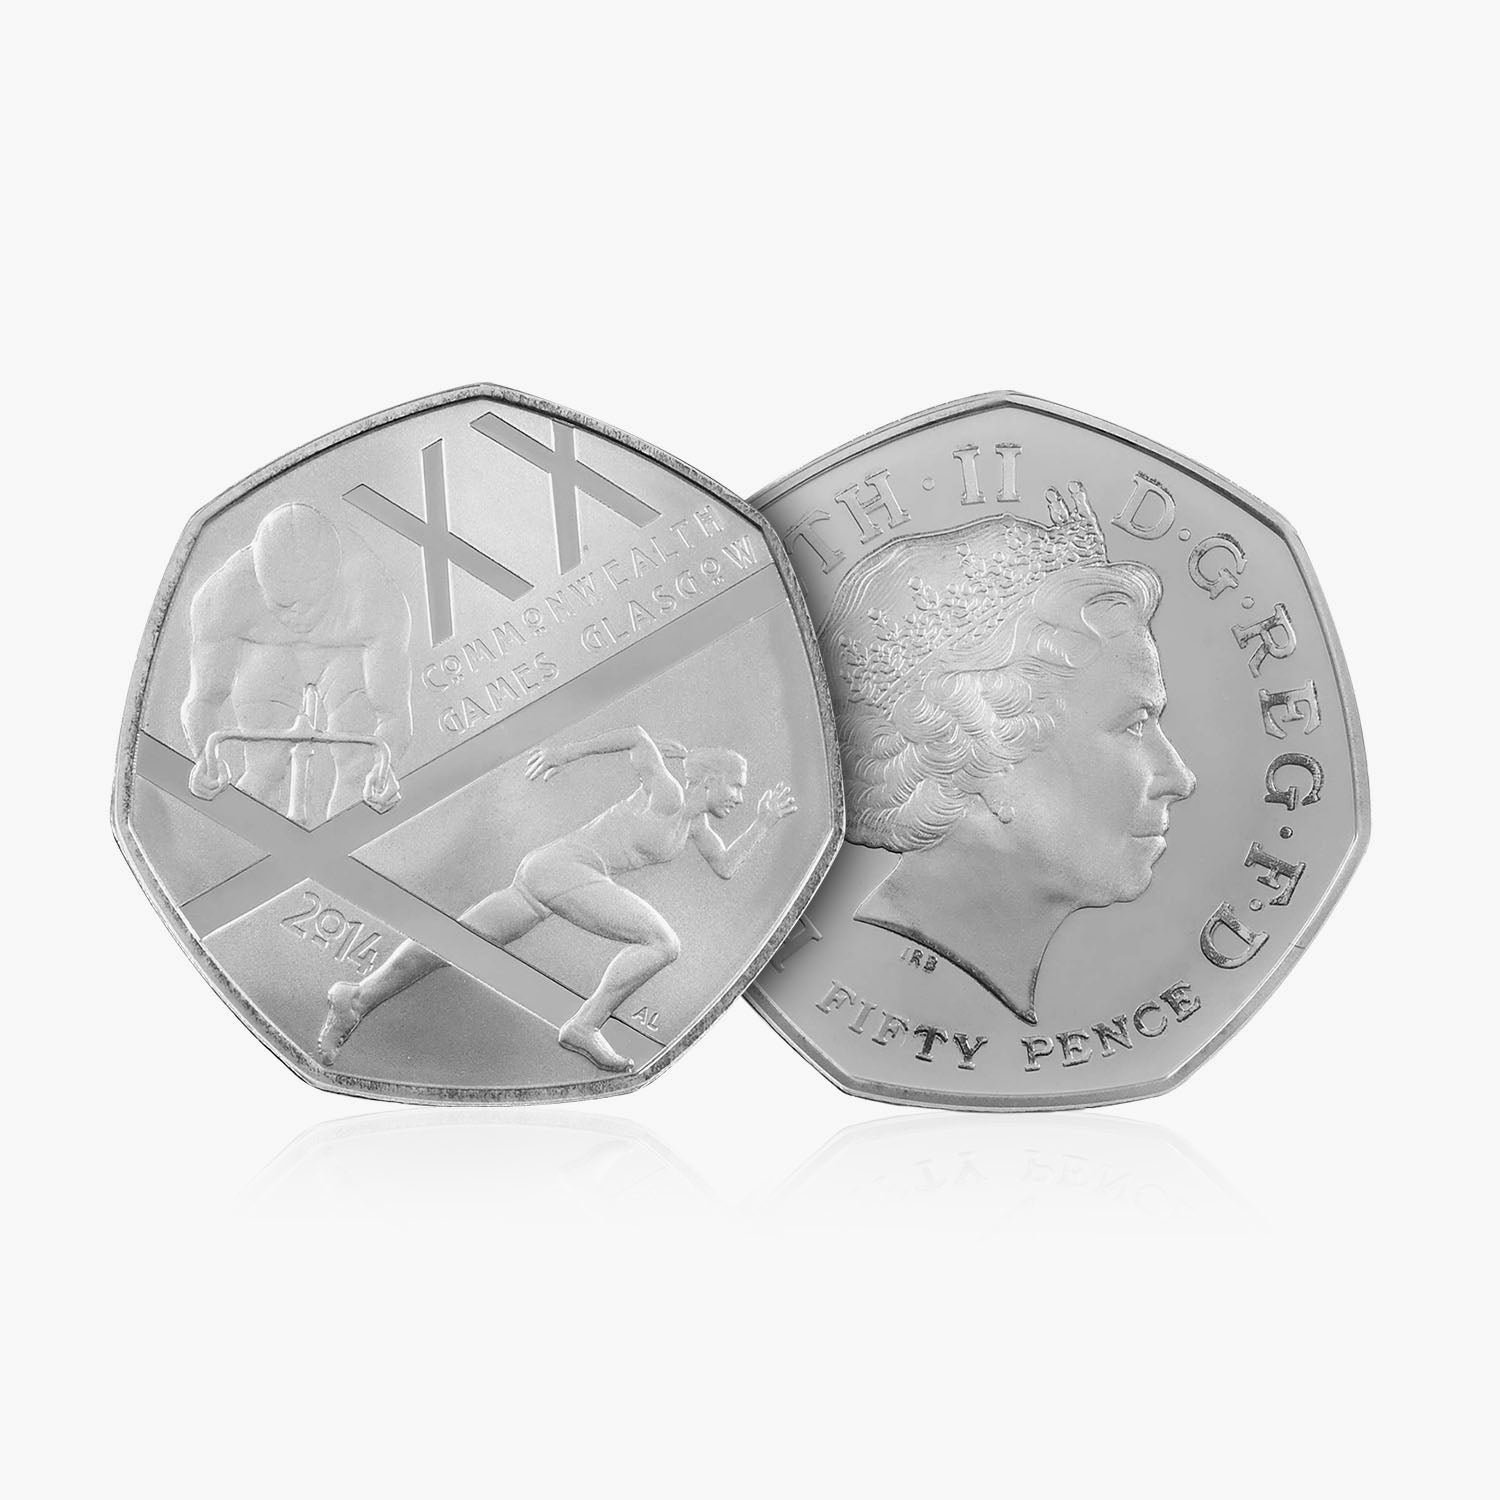 2014 Circulated Glasgow Commonwealth Games 50p Coin